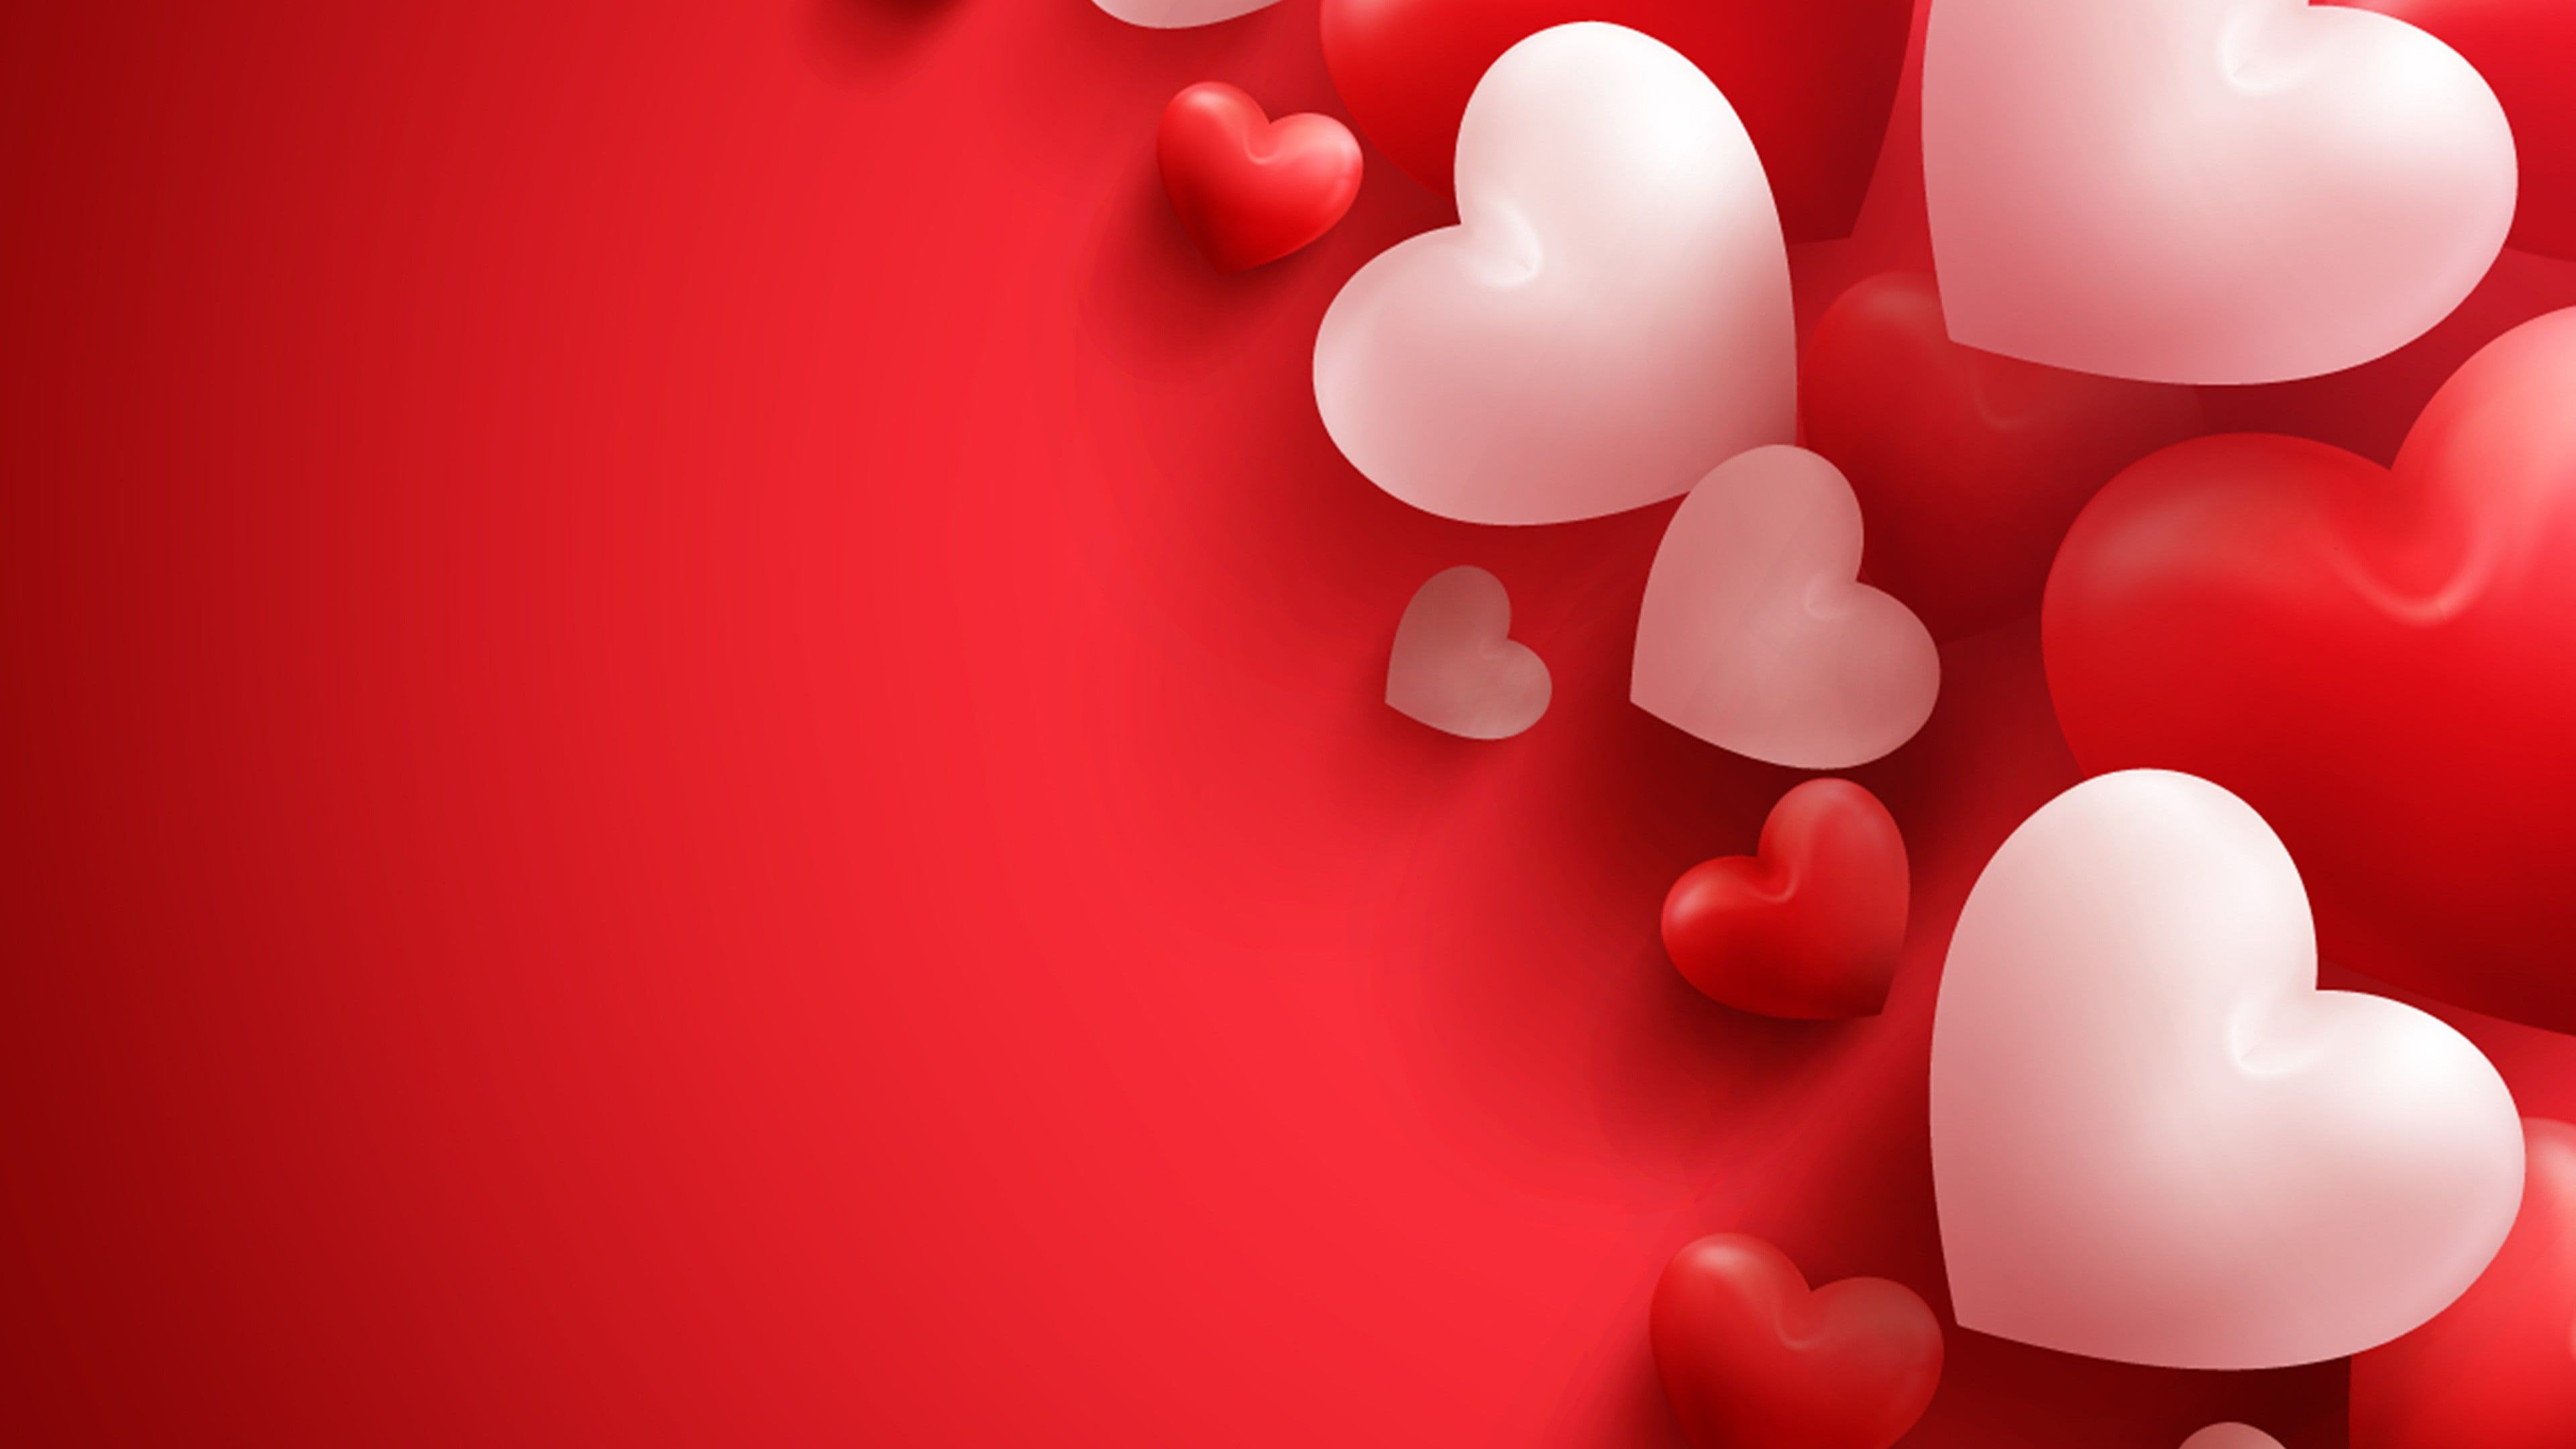 3840x2160 Red and White Heart Wallpapers Top Free Red and White Heart Backgrounds